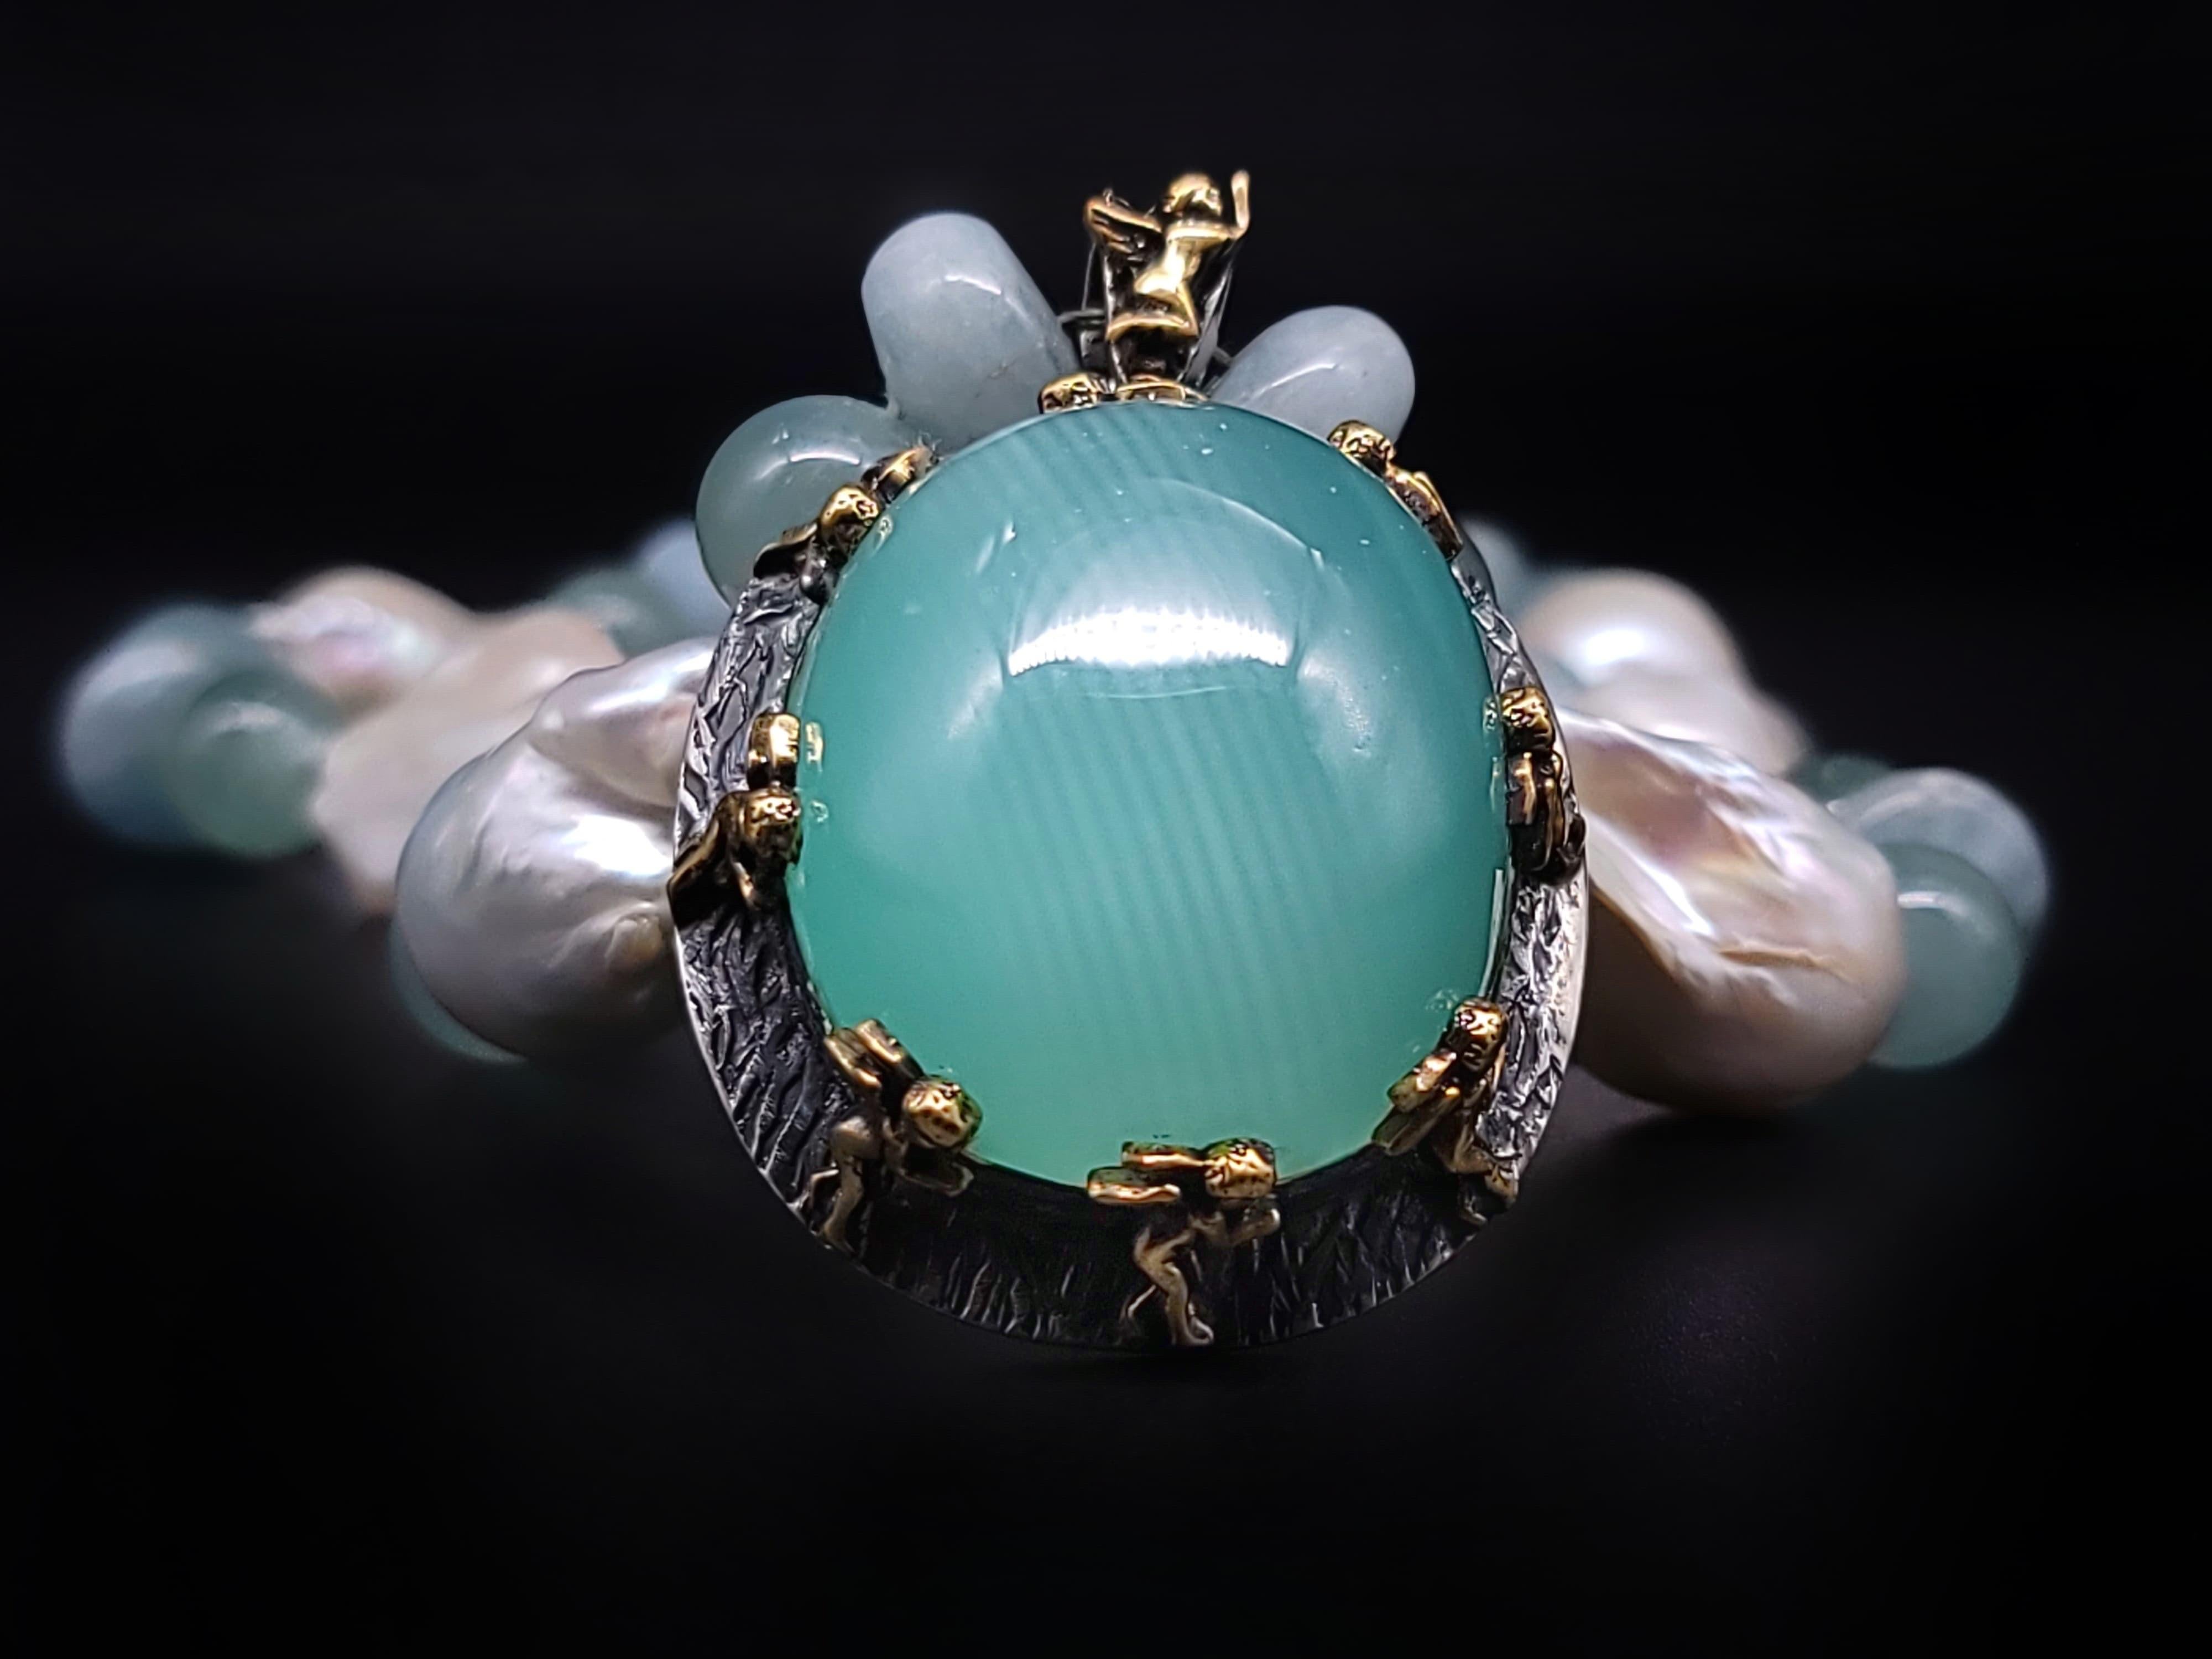 A.Jeschel Massive Aquamarine Pendant suspended from Baroque Pearl Necklace For Sale 8